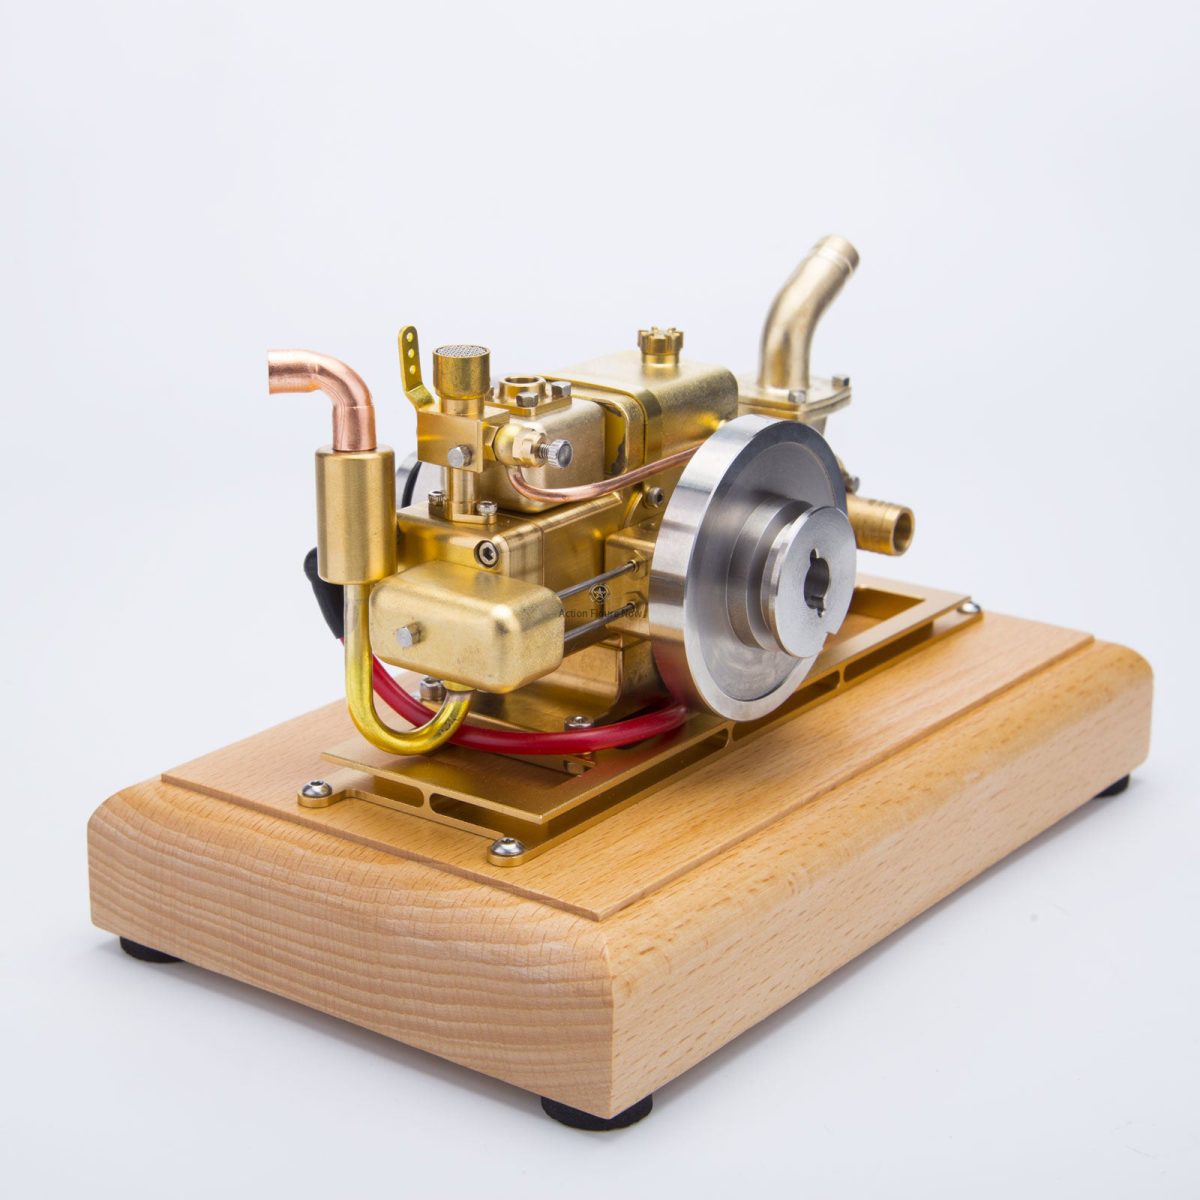 1.6cc Mini Retro Gas Engine: Water-Cooled, 4-Stroke Model for Display or Collection